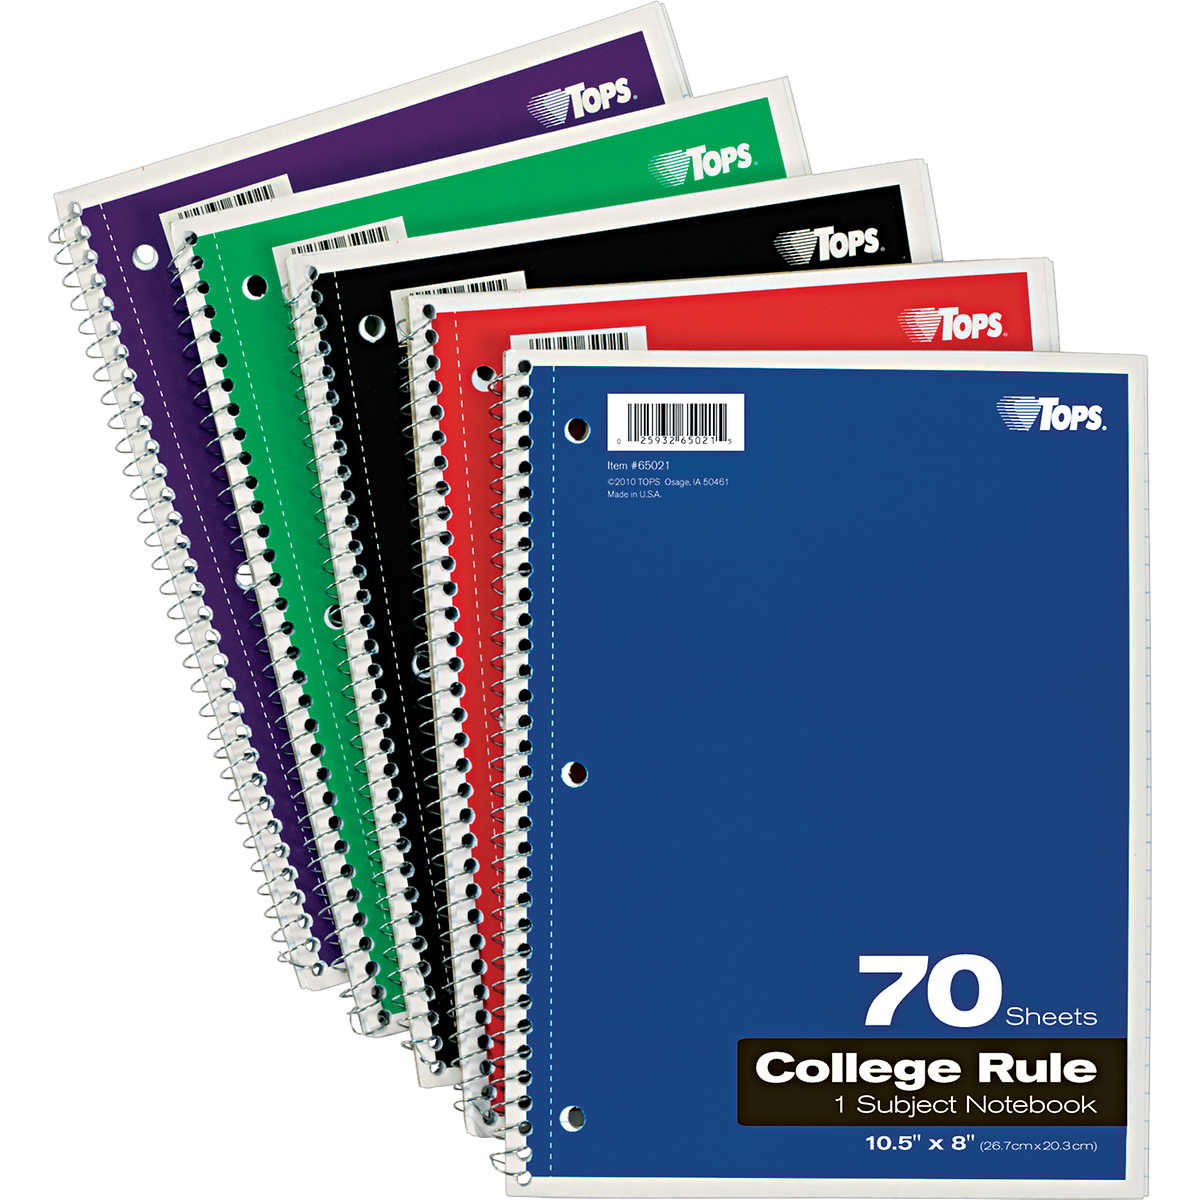 Details about   Spiral Notebooks 5 Subjects 150 Sheets Wide Ruled Notebooks Lot 6 GREEN BLUE RED 